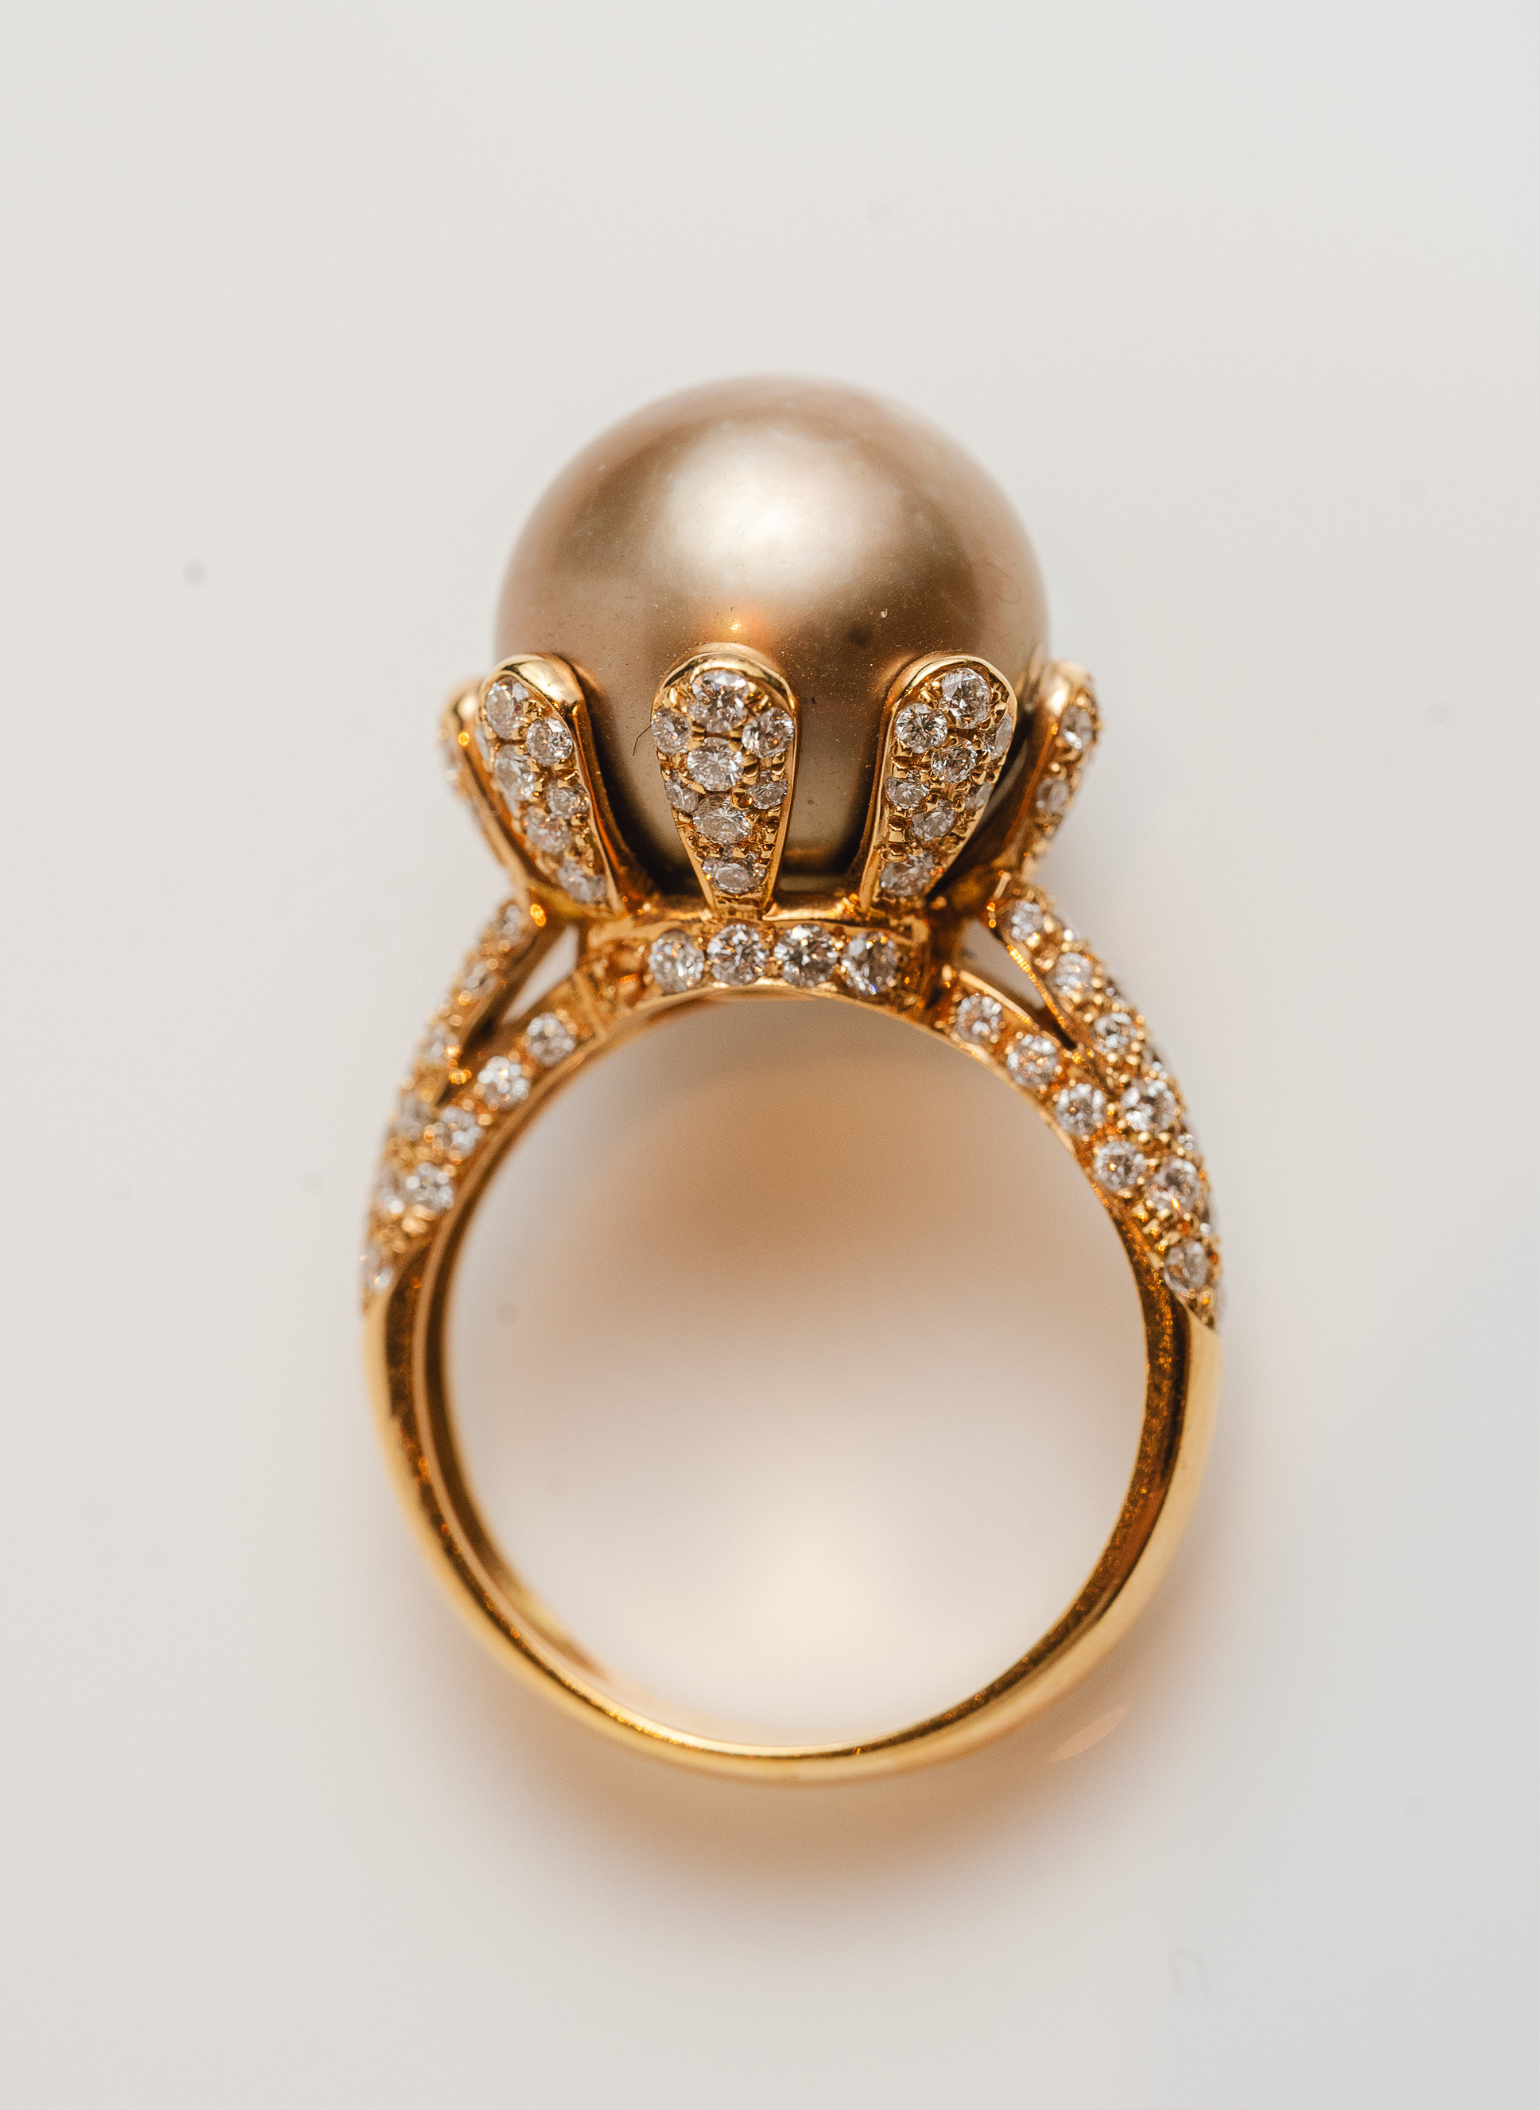 Dolce Far Niente Australian Pearl and Diamonds Ring